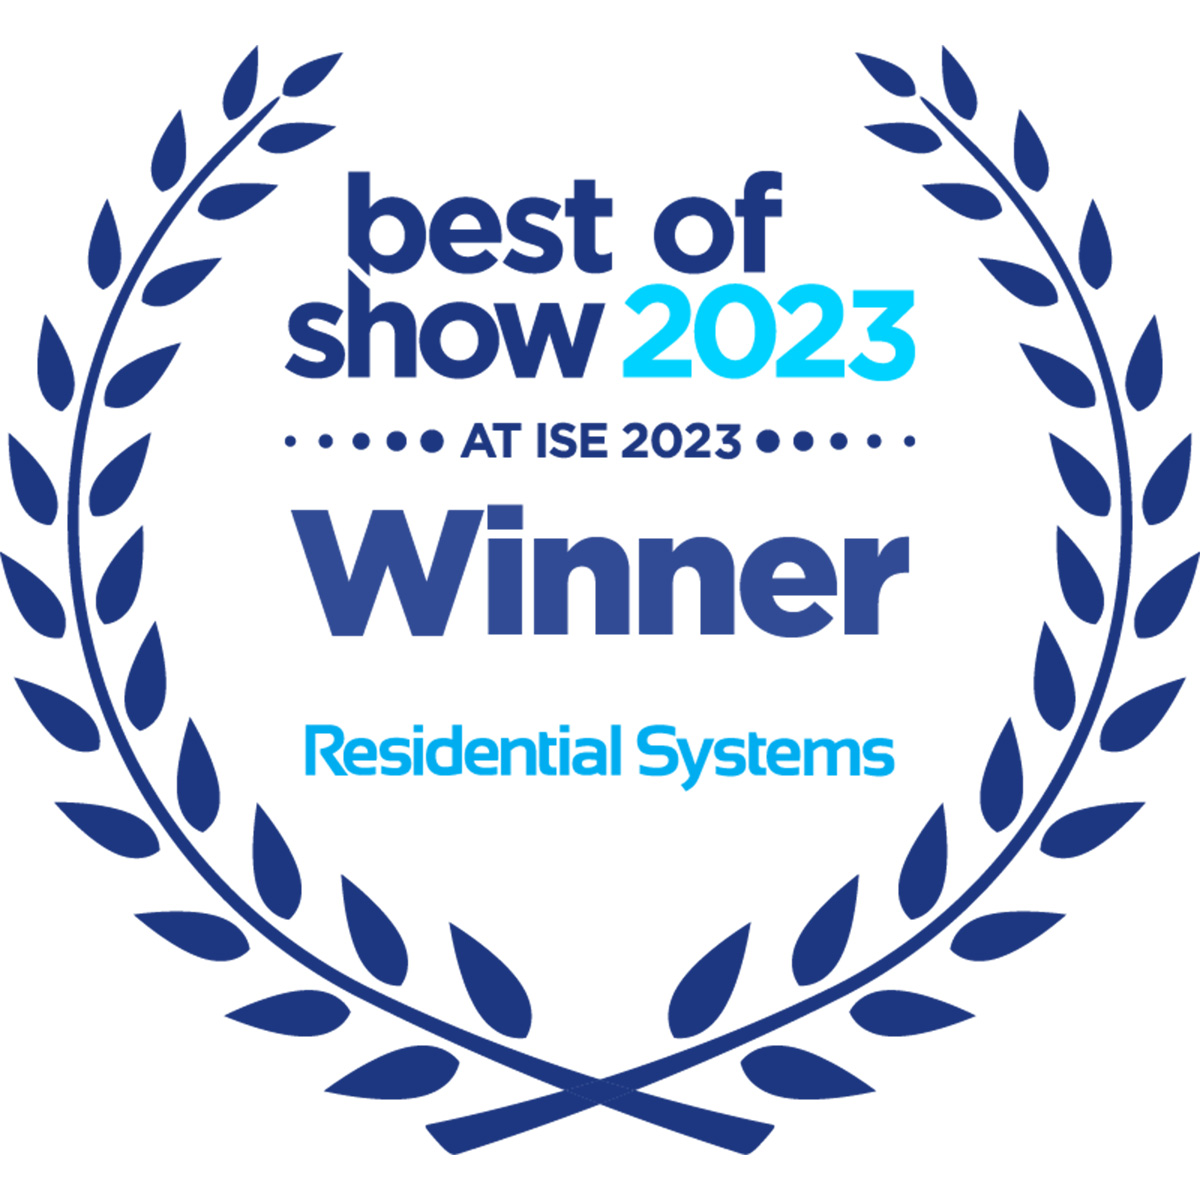 Residential Systems “Best of Show” at ISE